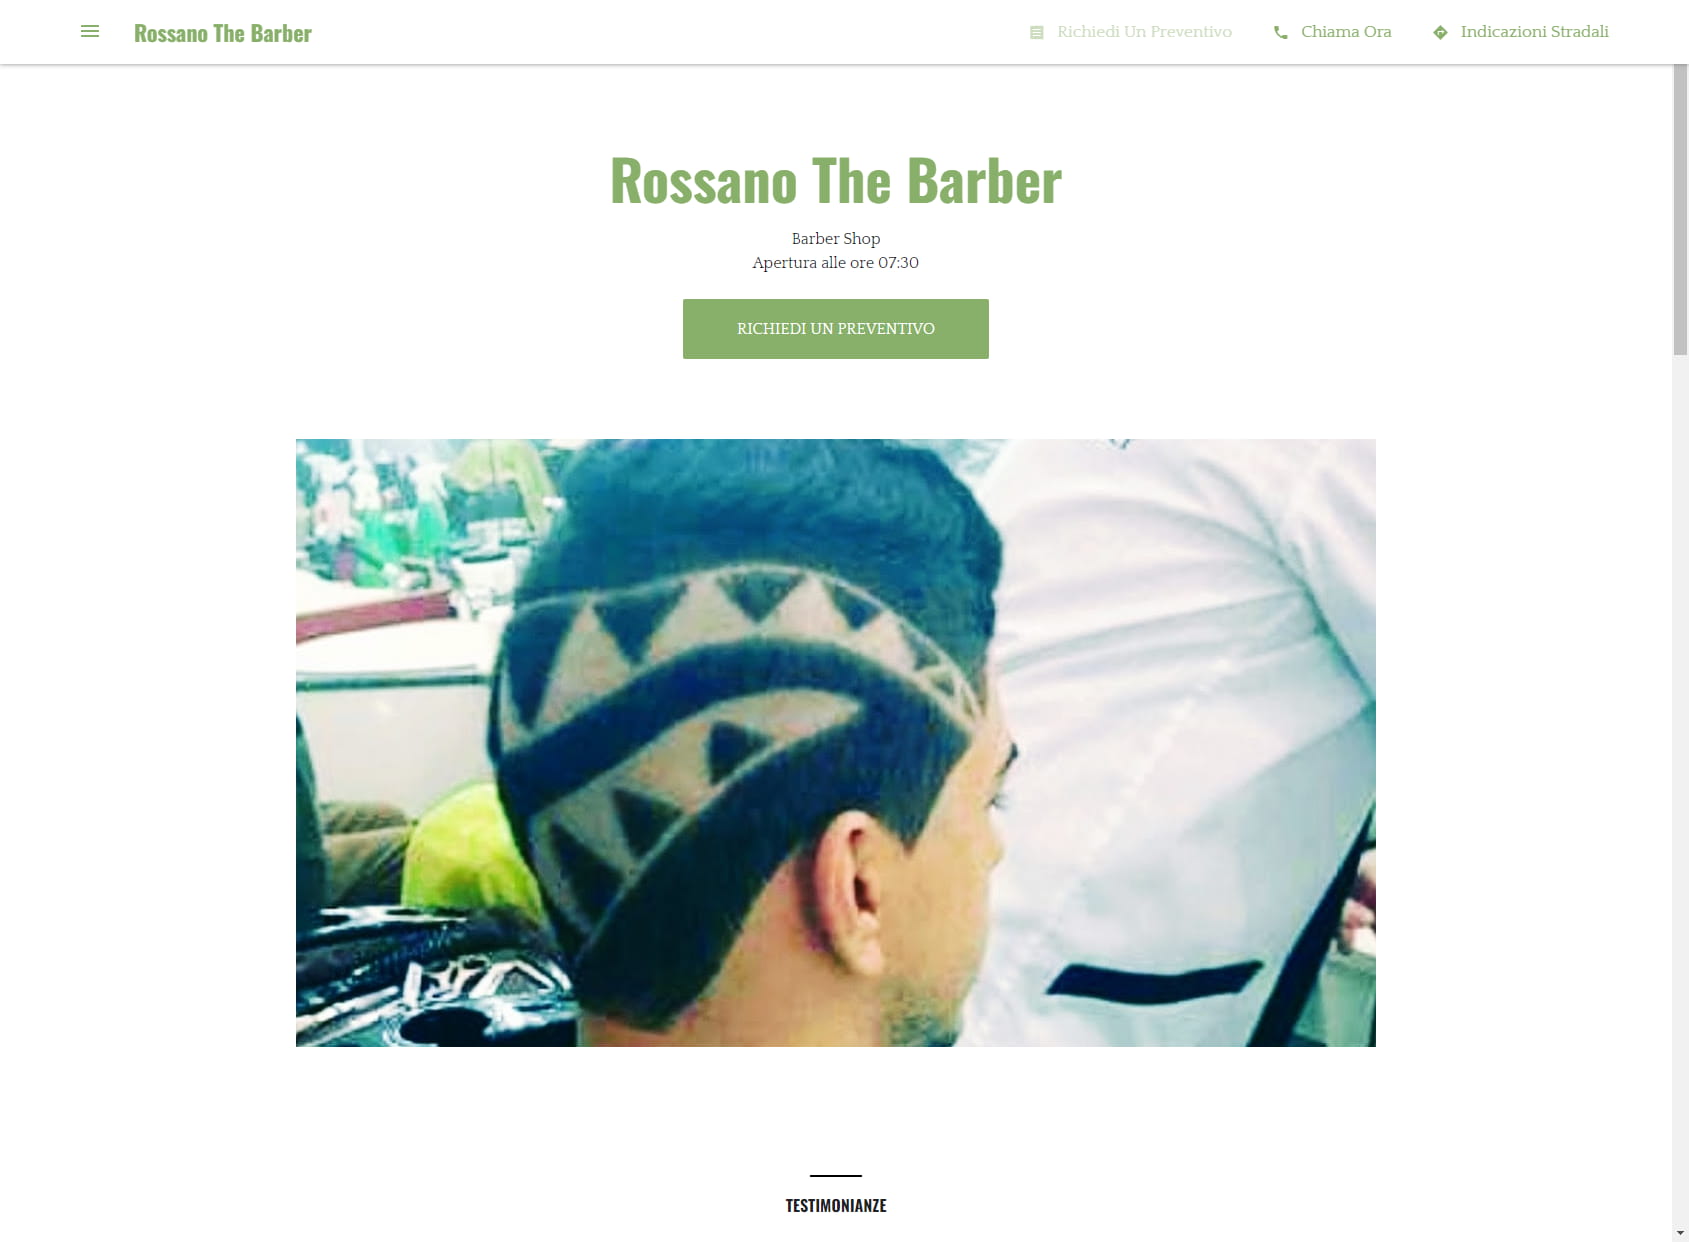 Rossano The barber